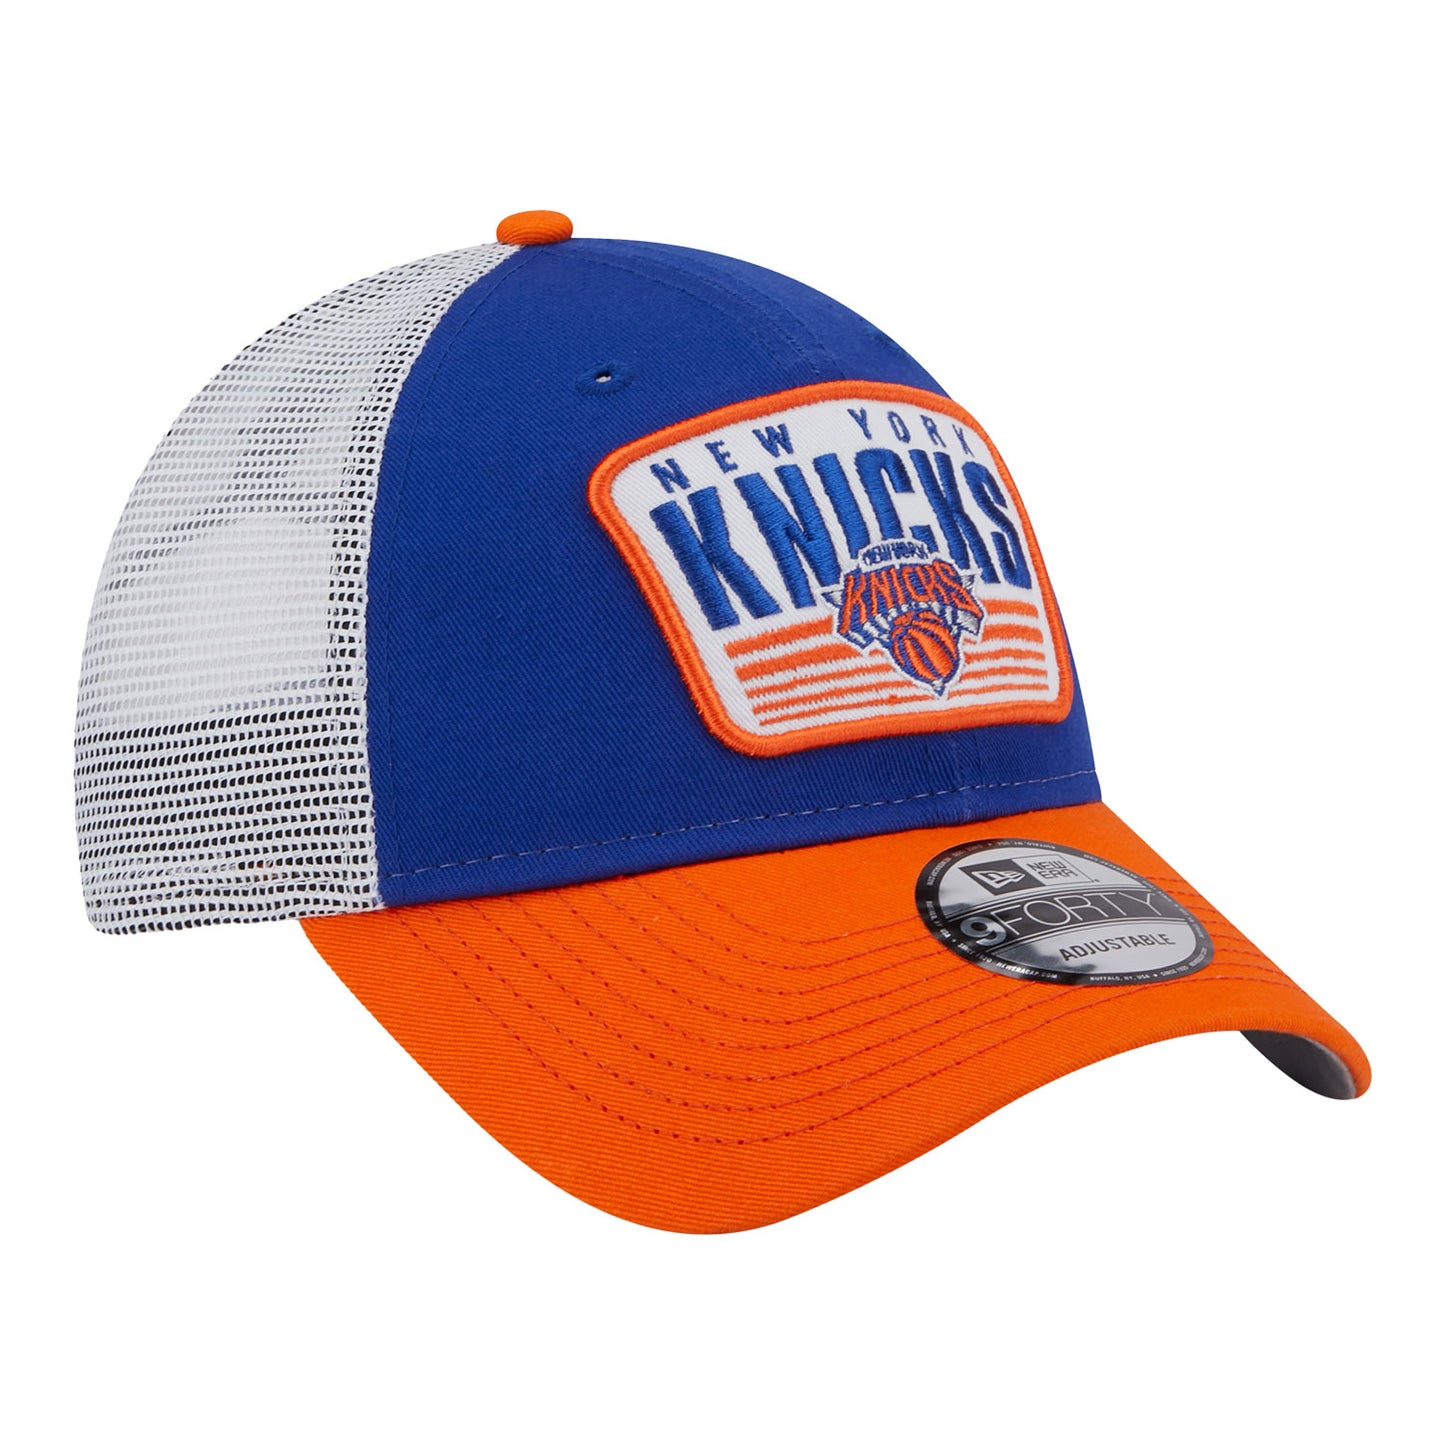 Youth New Era Knicks Two-Tone Patch Adjustable Hat - In Blue And Orange - Angled Right View